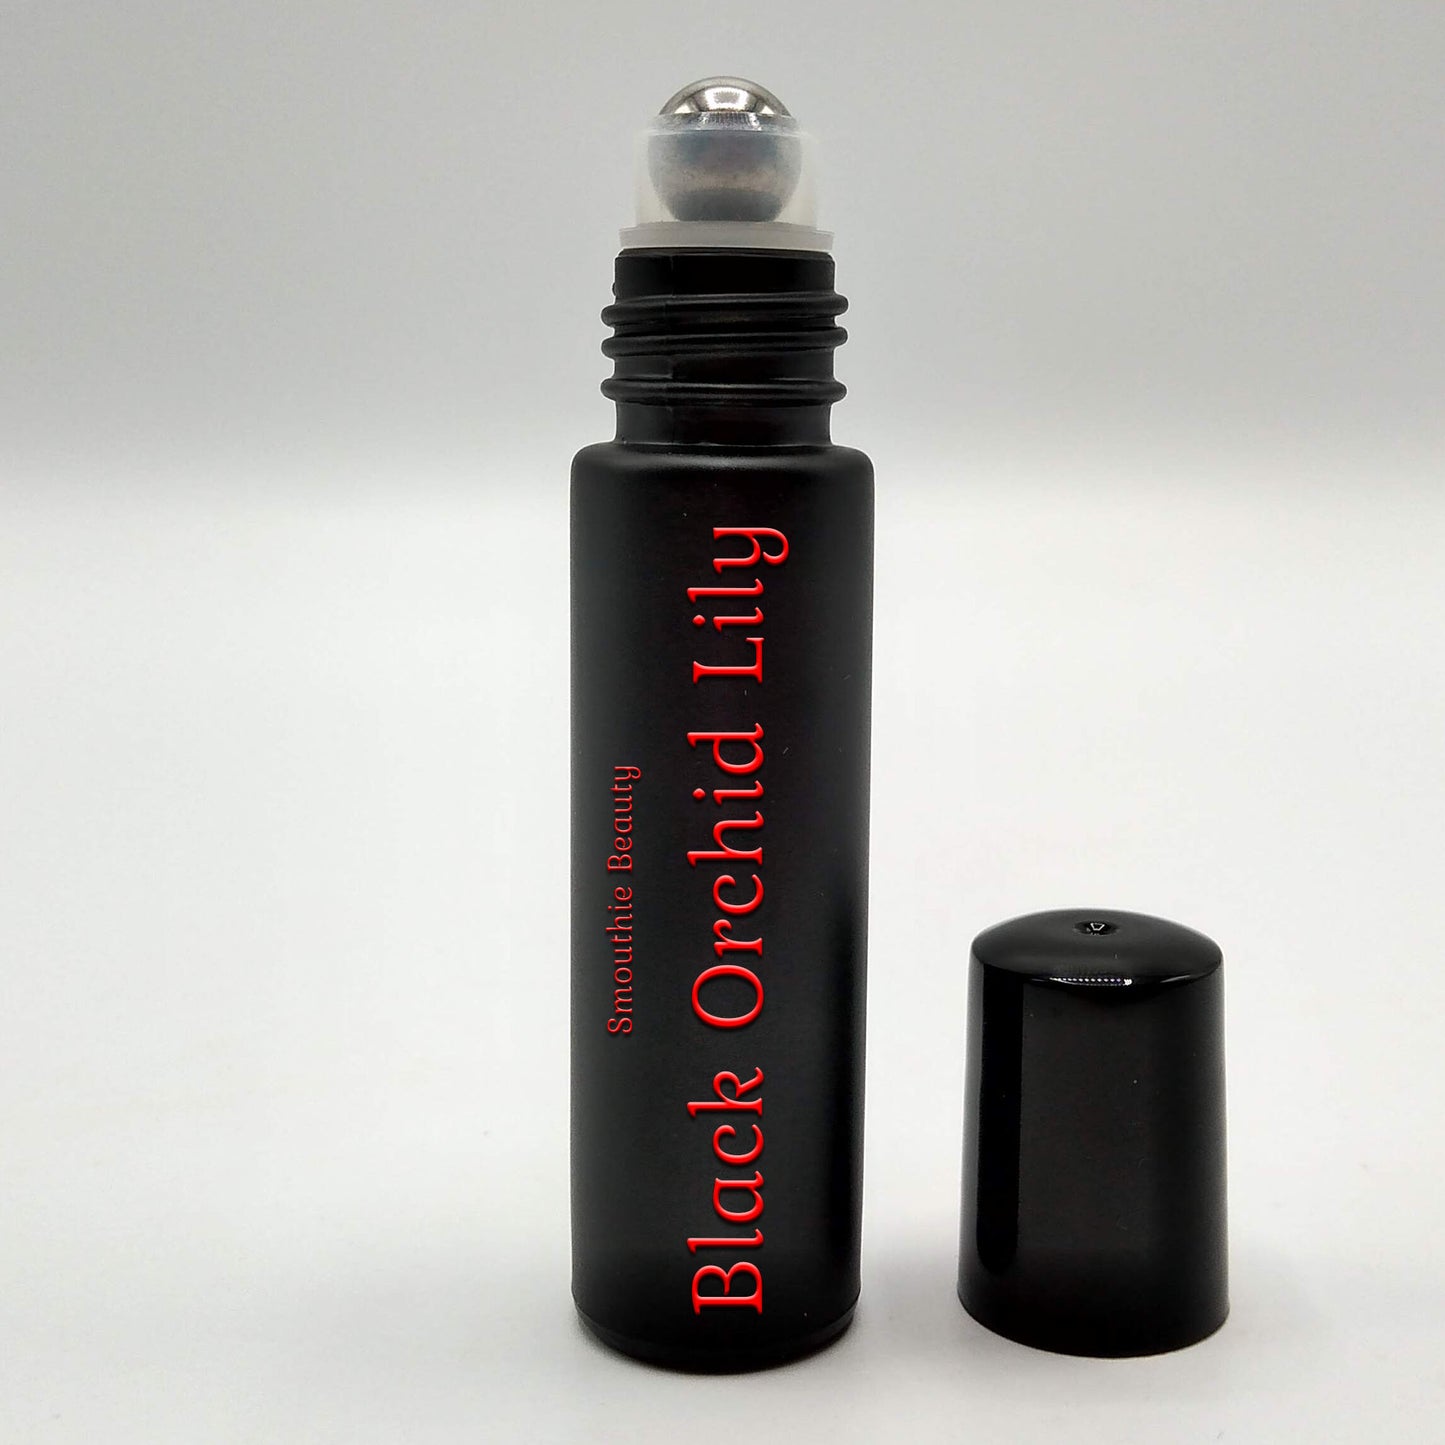 Black Orchid Lily Perfume Oil Fragrance Roll On